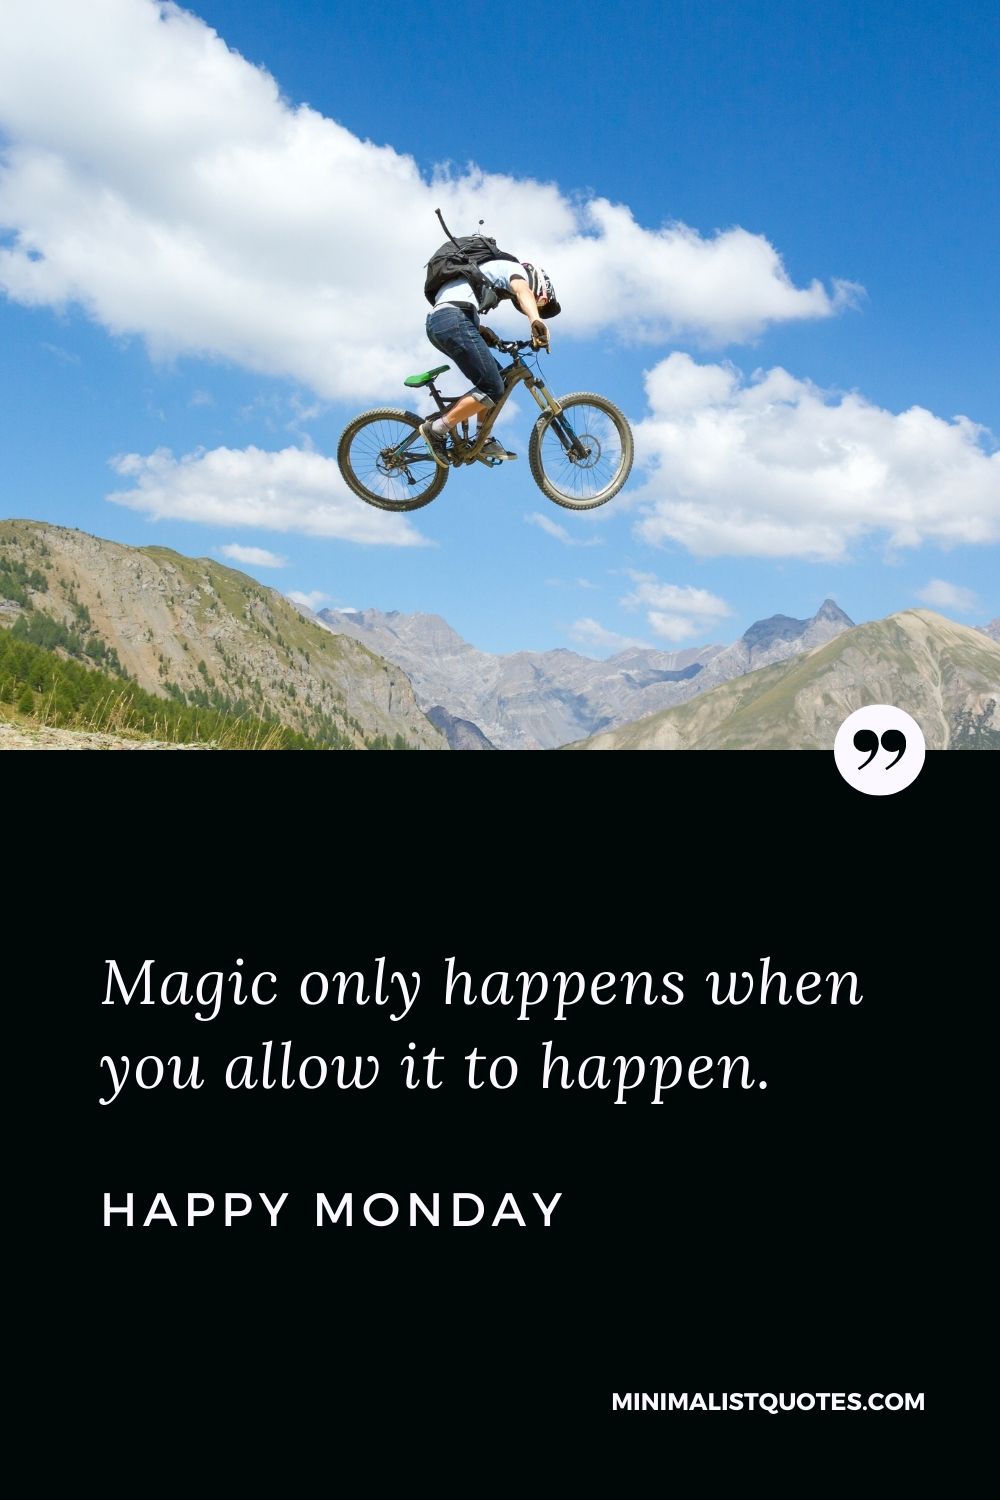 Monday Motivation Quote & Message with Image: Magic only happens when you allow it to happen. Happy Monday!